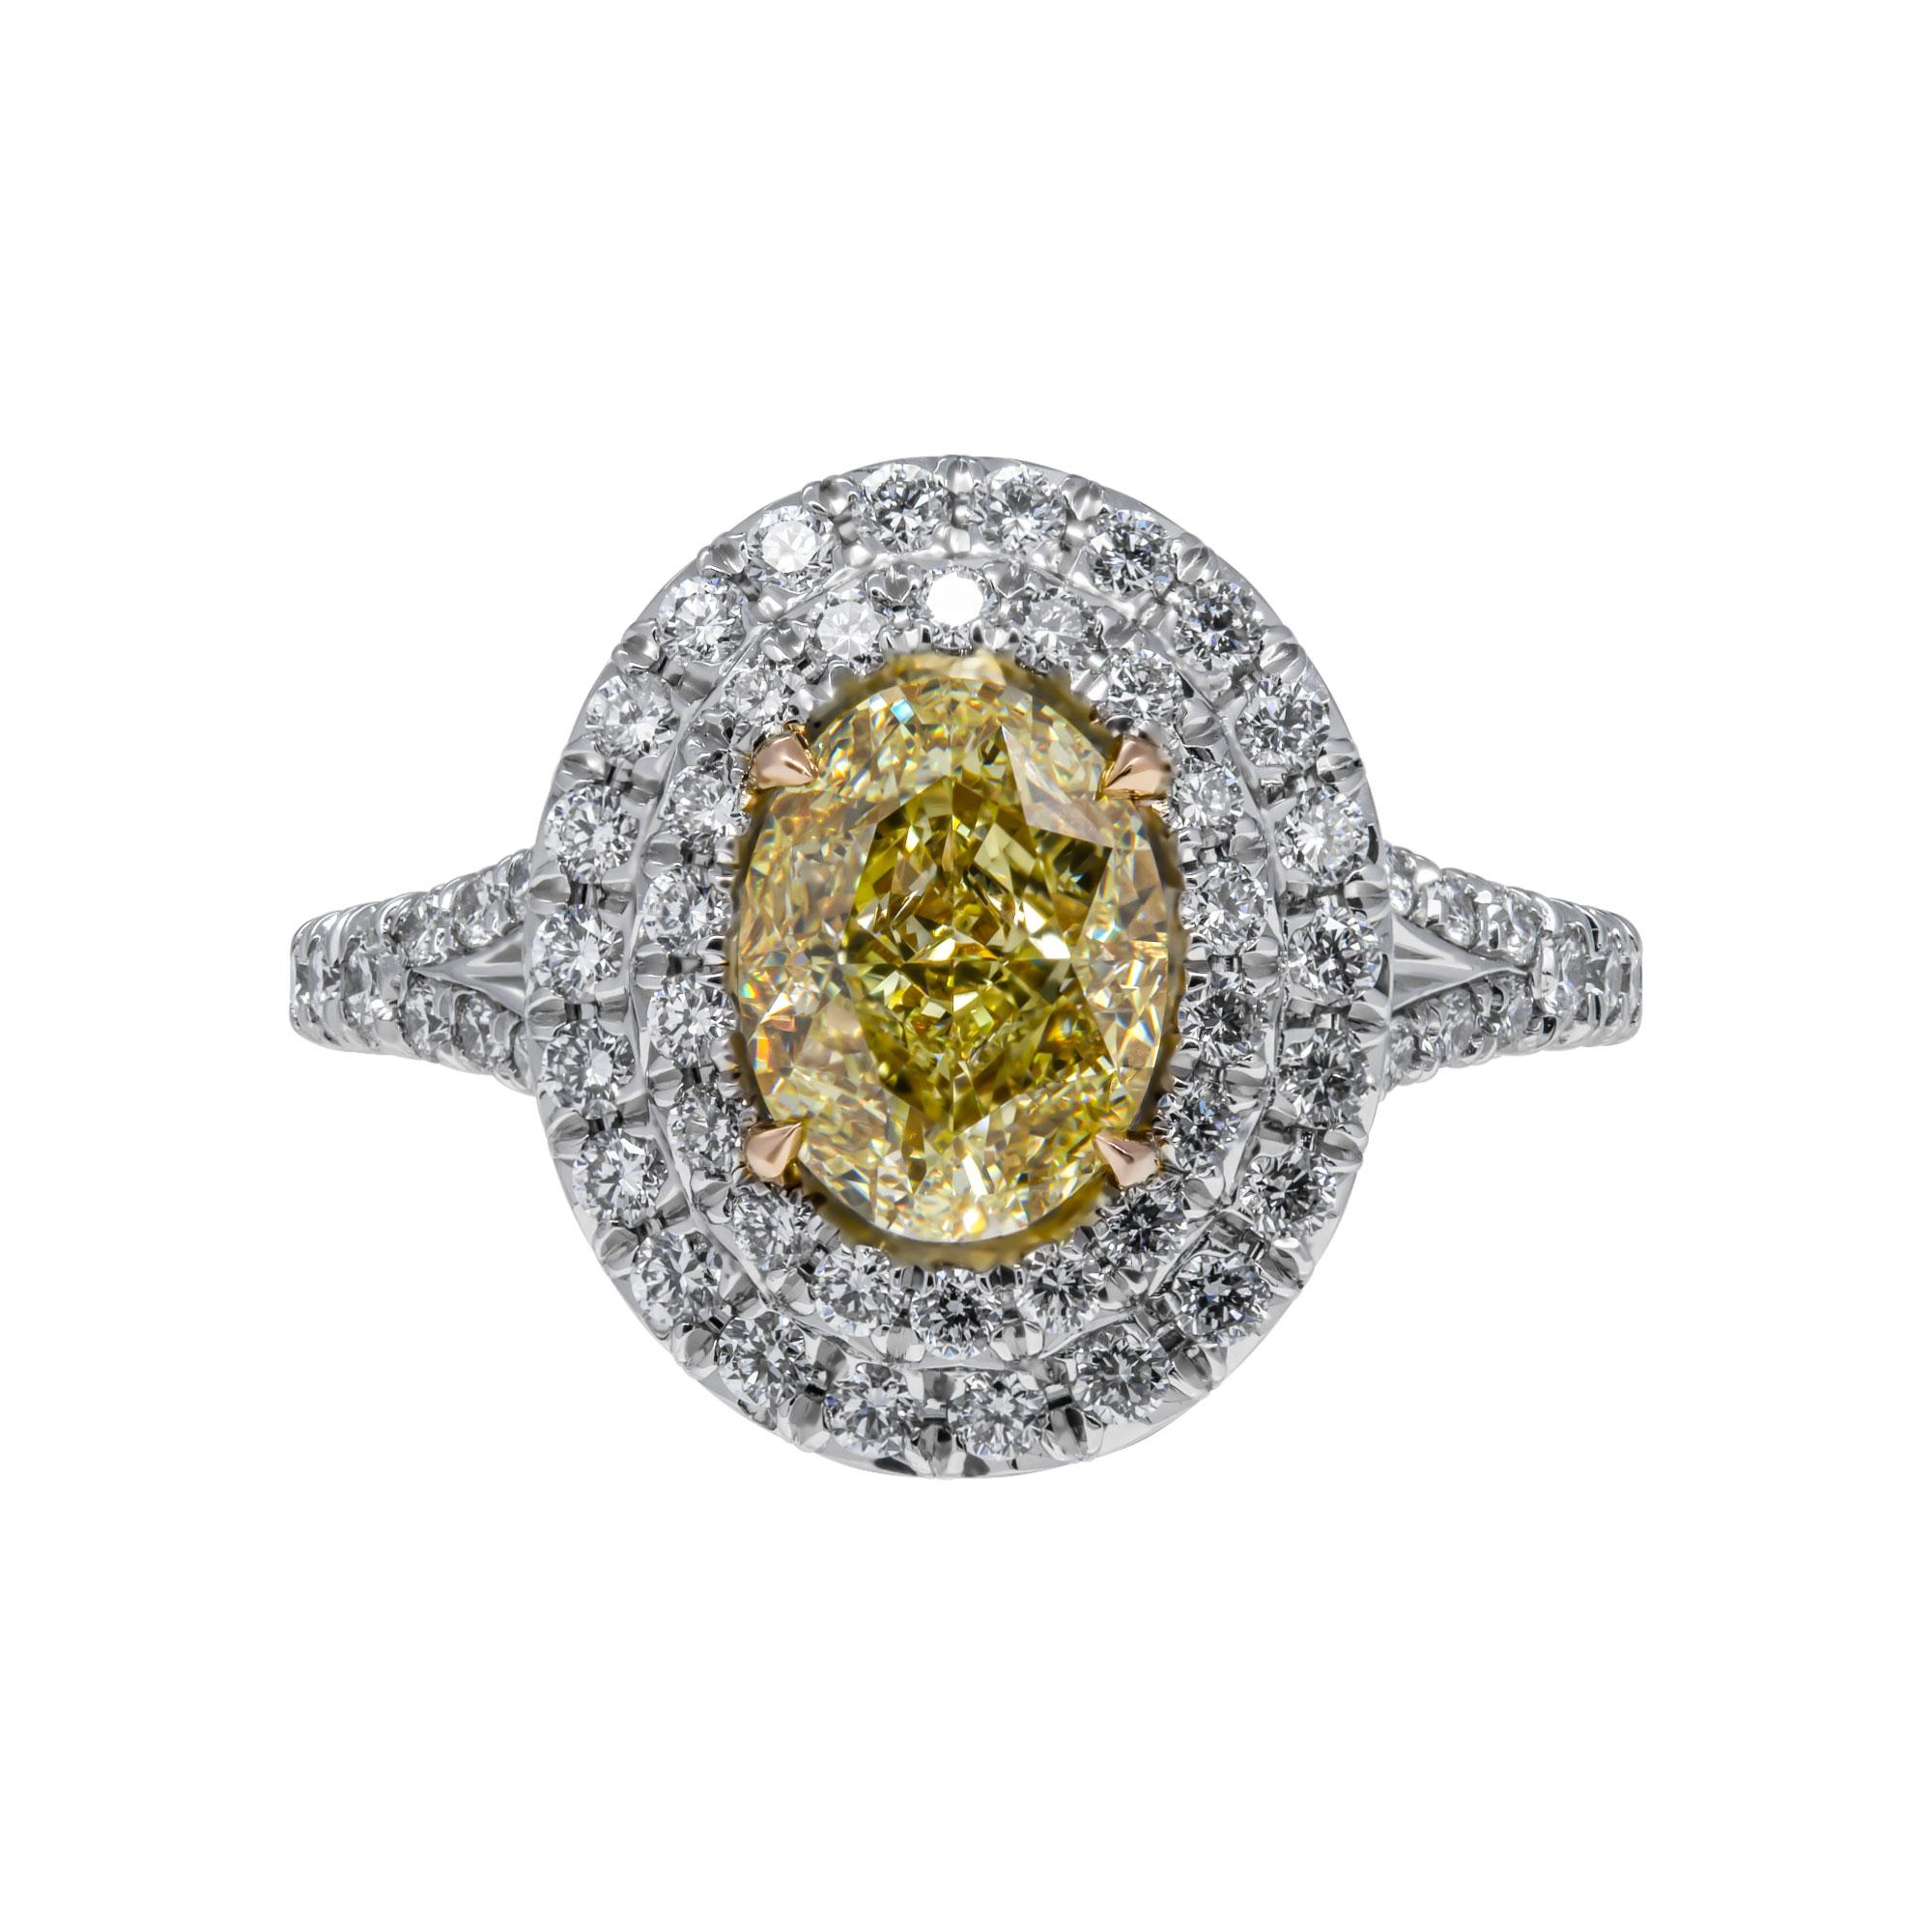 GIA Certified 1.51 Carat Oval Fancy Yellow Diamond Engagement Ring
Timeless Classic Oval Shape Diamond Engagement Ring - Timeless classis with a modern spin
Mounted in Platinum and 18K featuring exceptional pave work that compliments the center